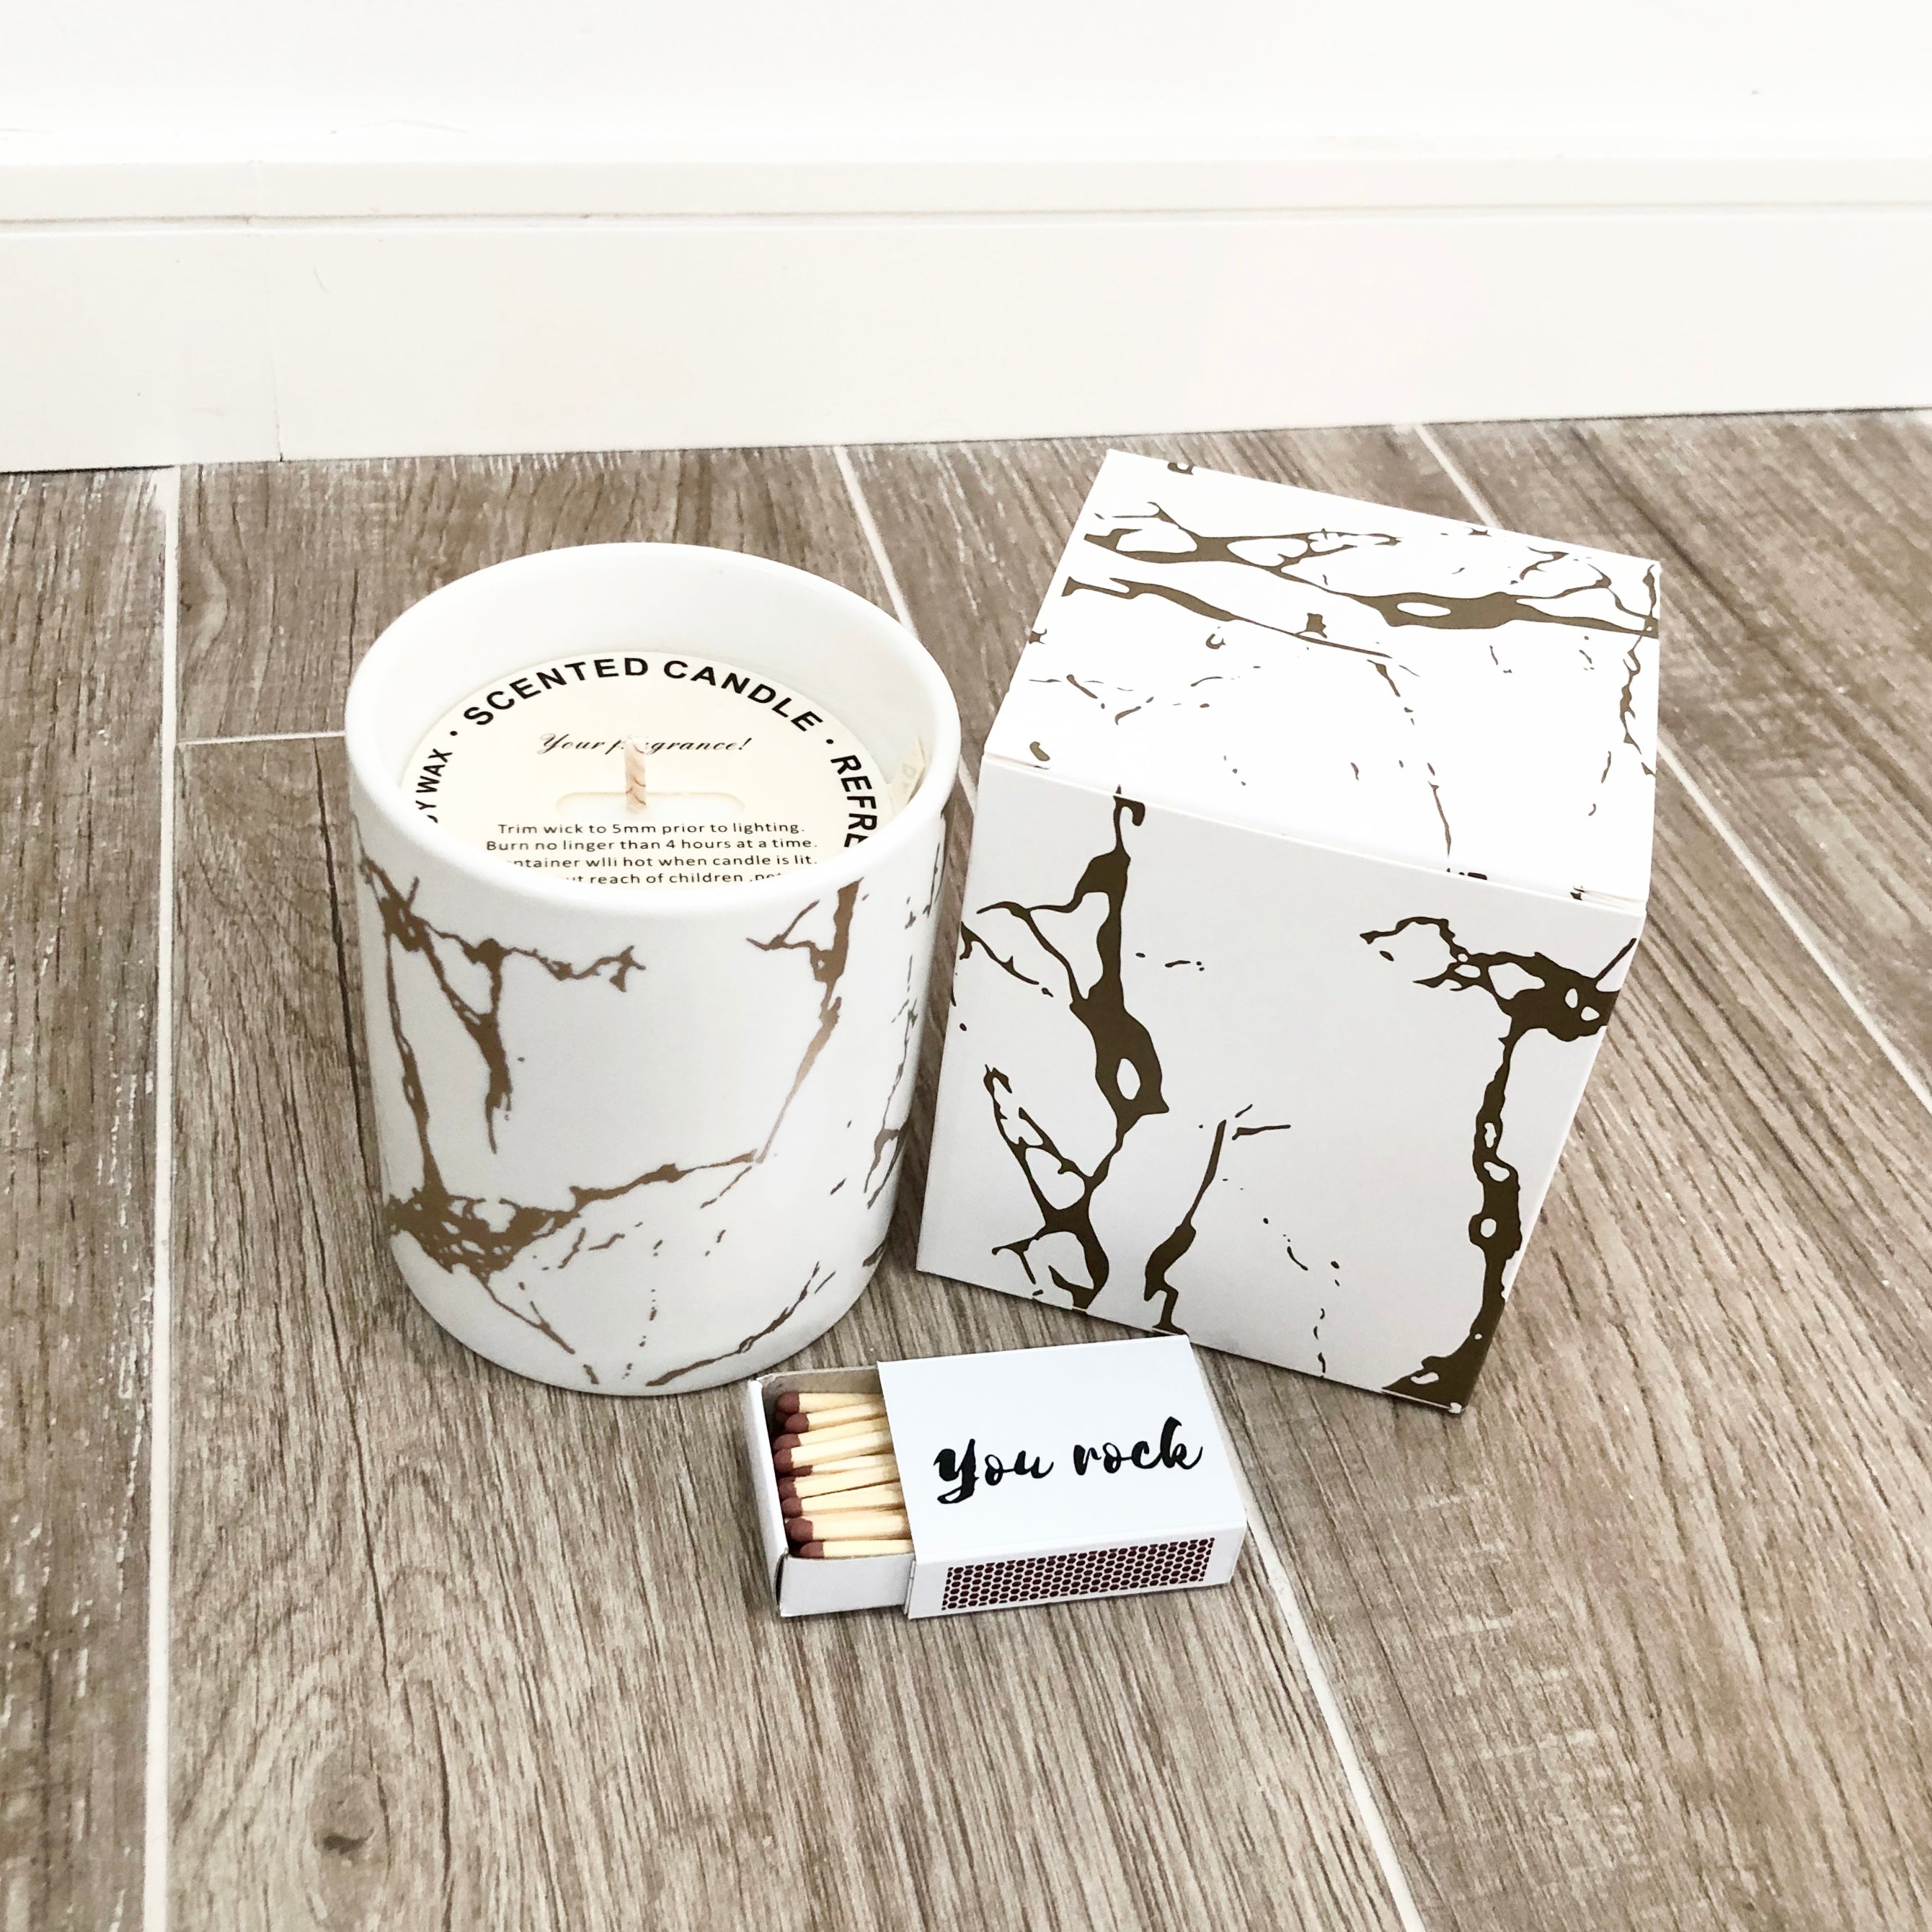 Kintsugi Ceramic Soy Wax Scented Candle 